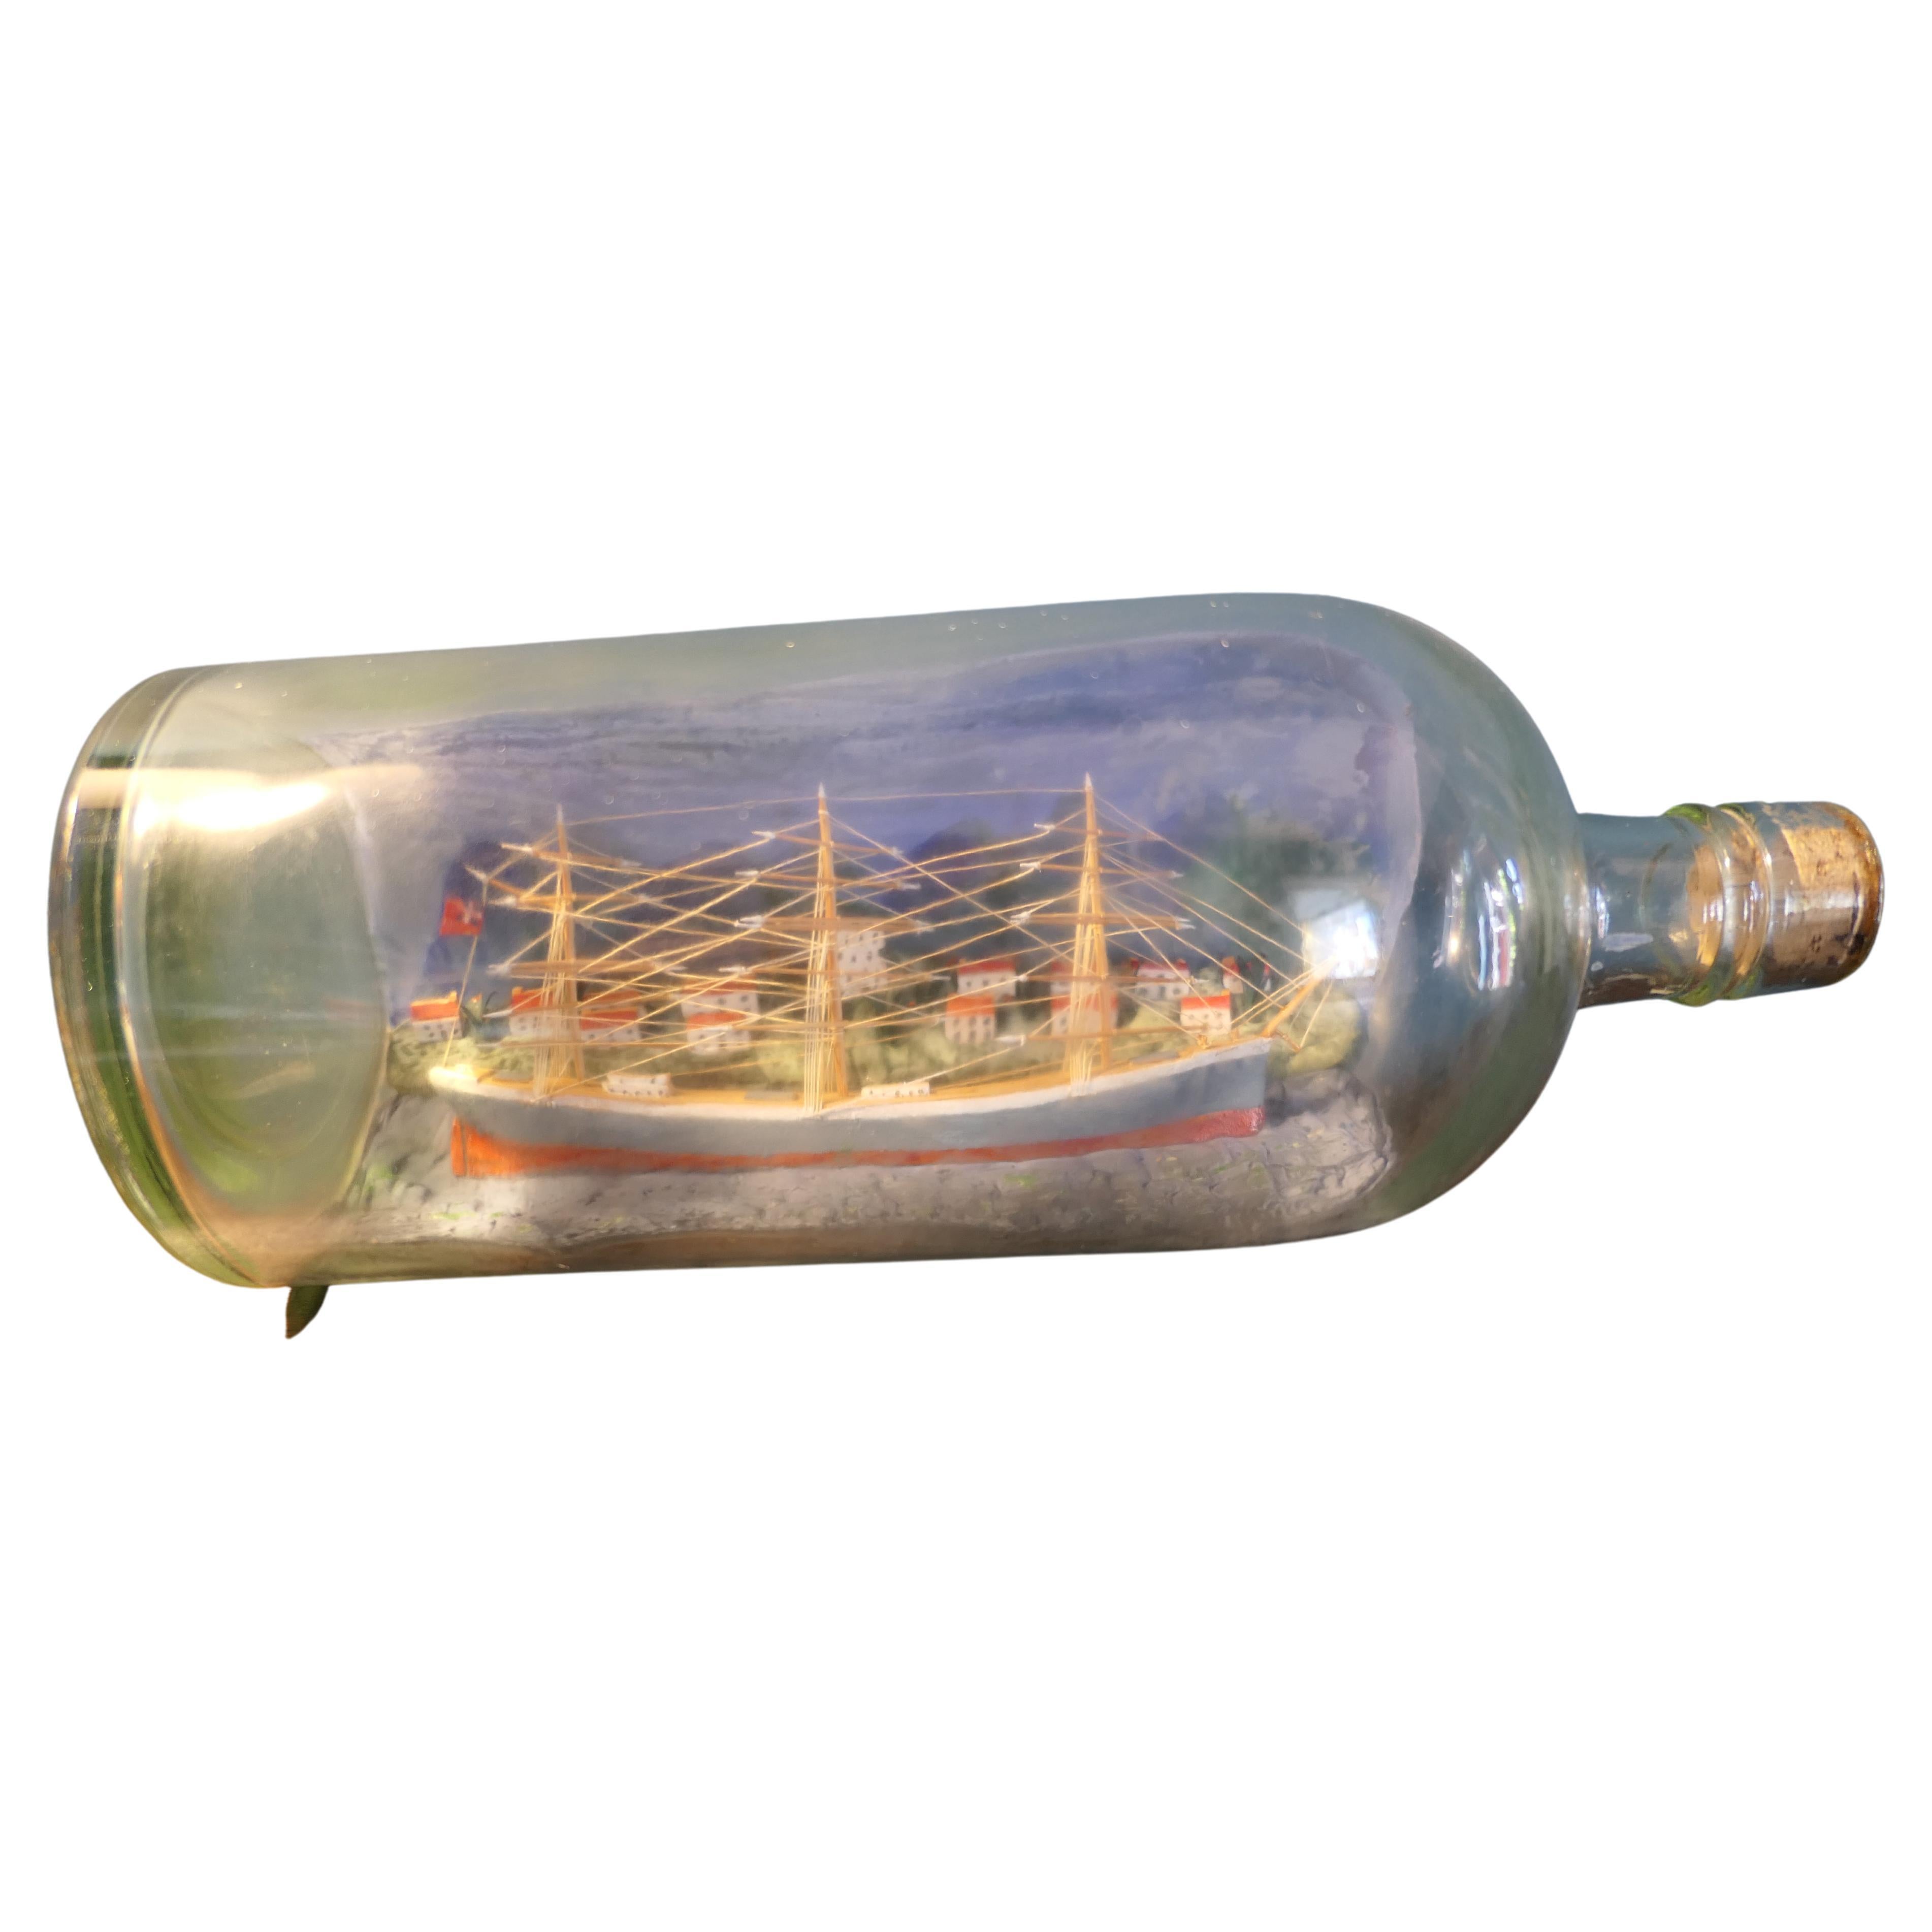 3 Masted Sailing Ship in a Bottle